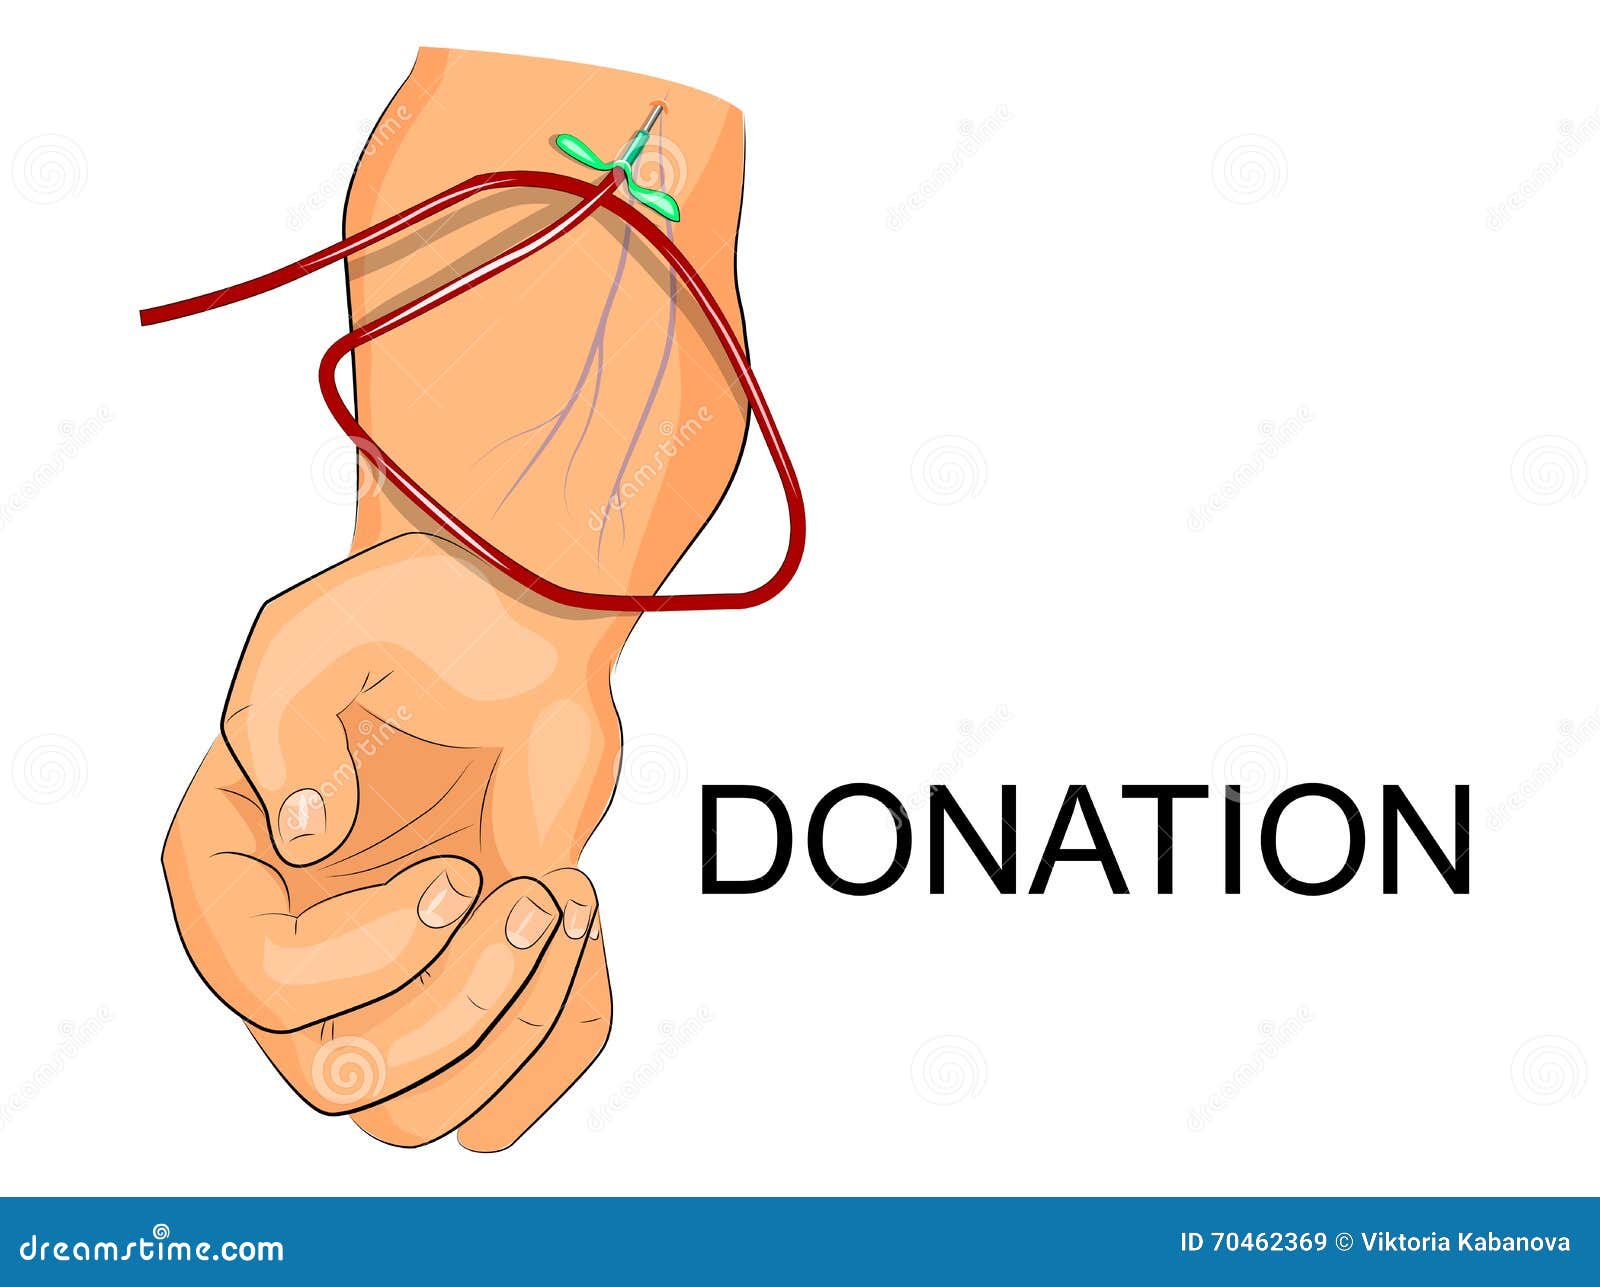 the donors arm with the intravenous system